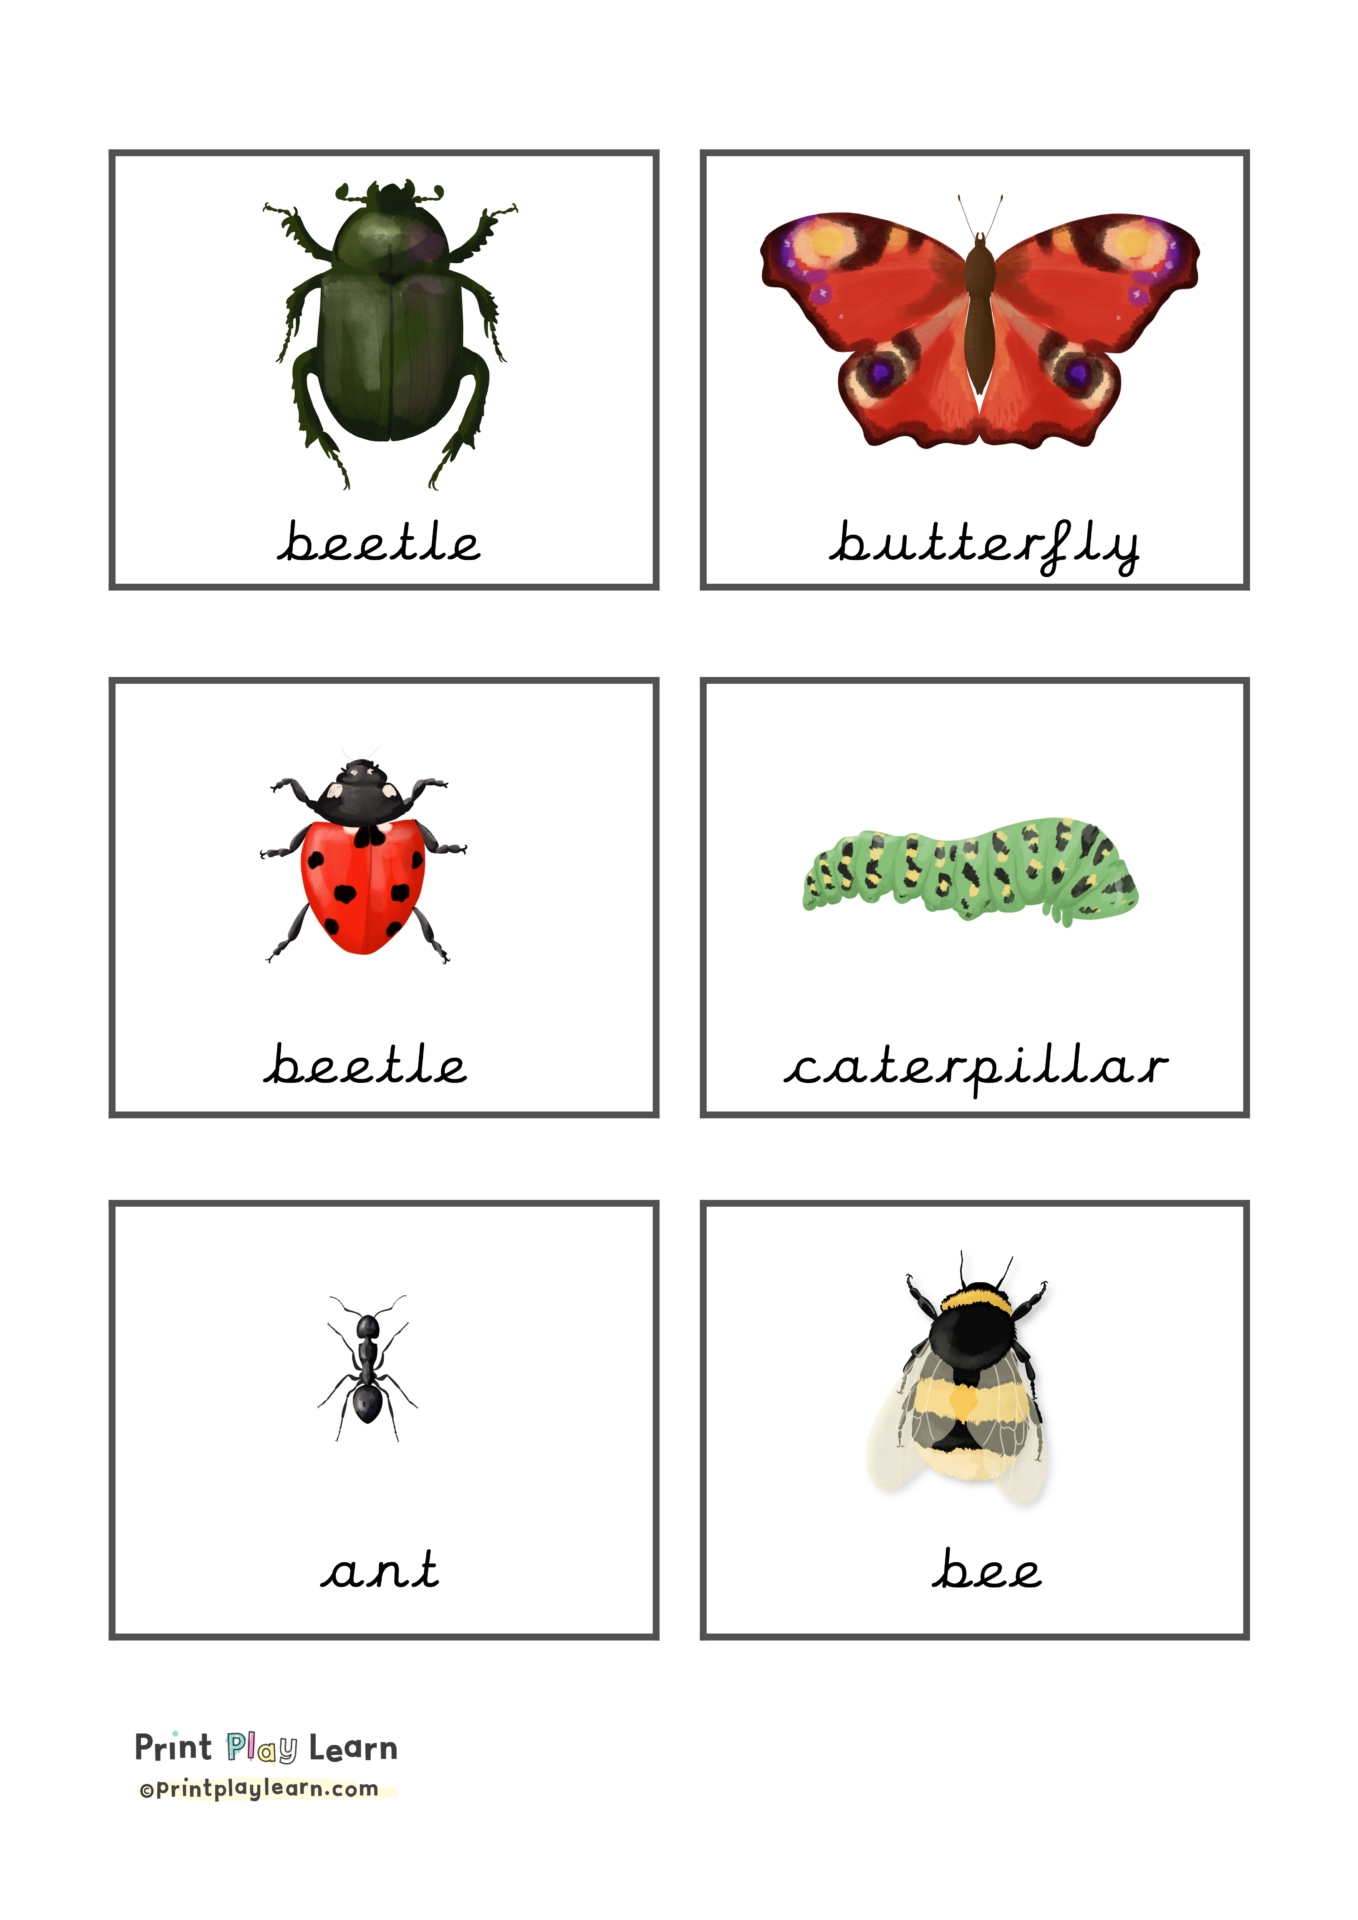 Insect Flashcards Printable Teaching Resources Print Play Learn